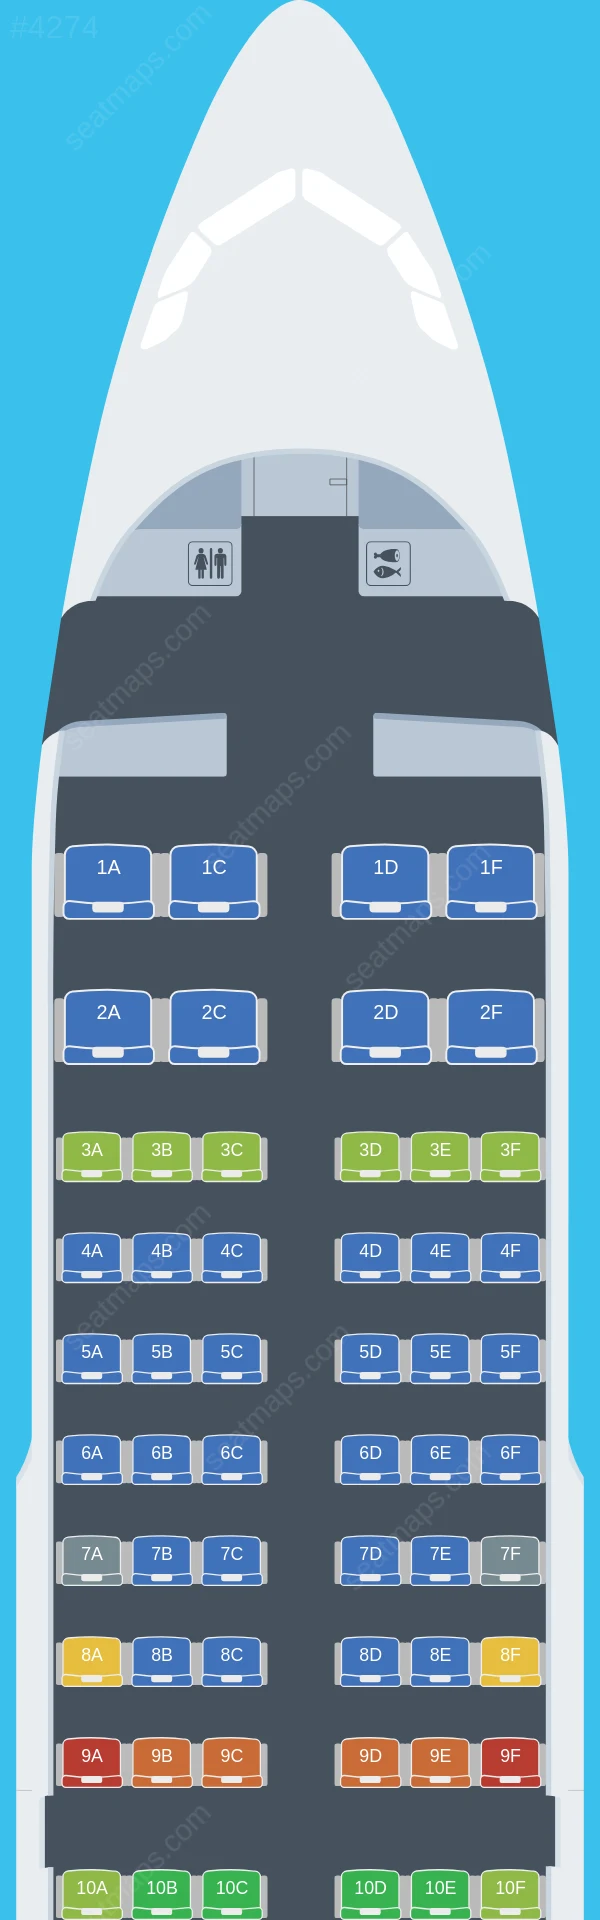 Ural Airlines Airbus A319-100 seatmap preview